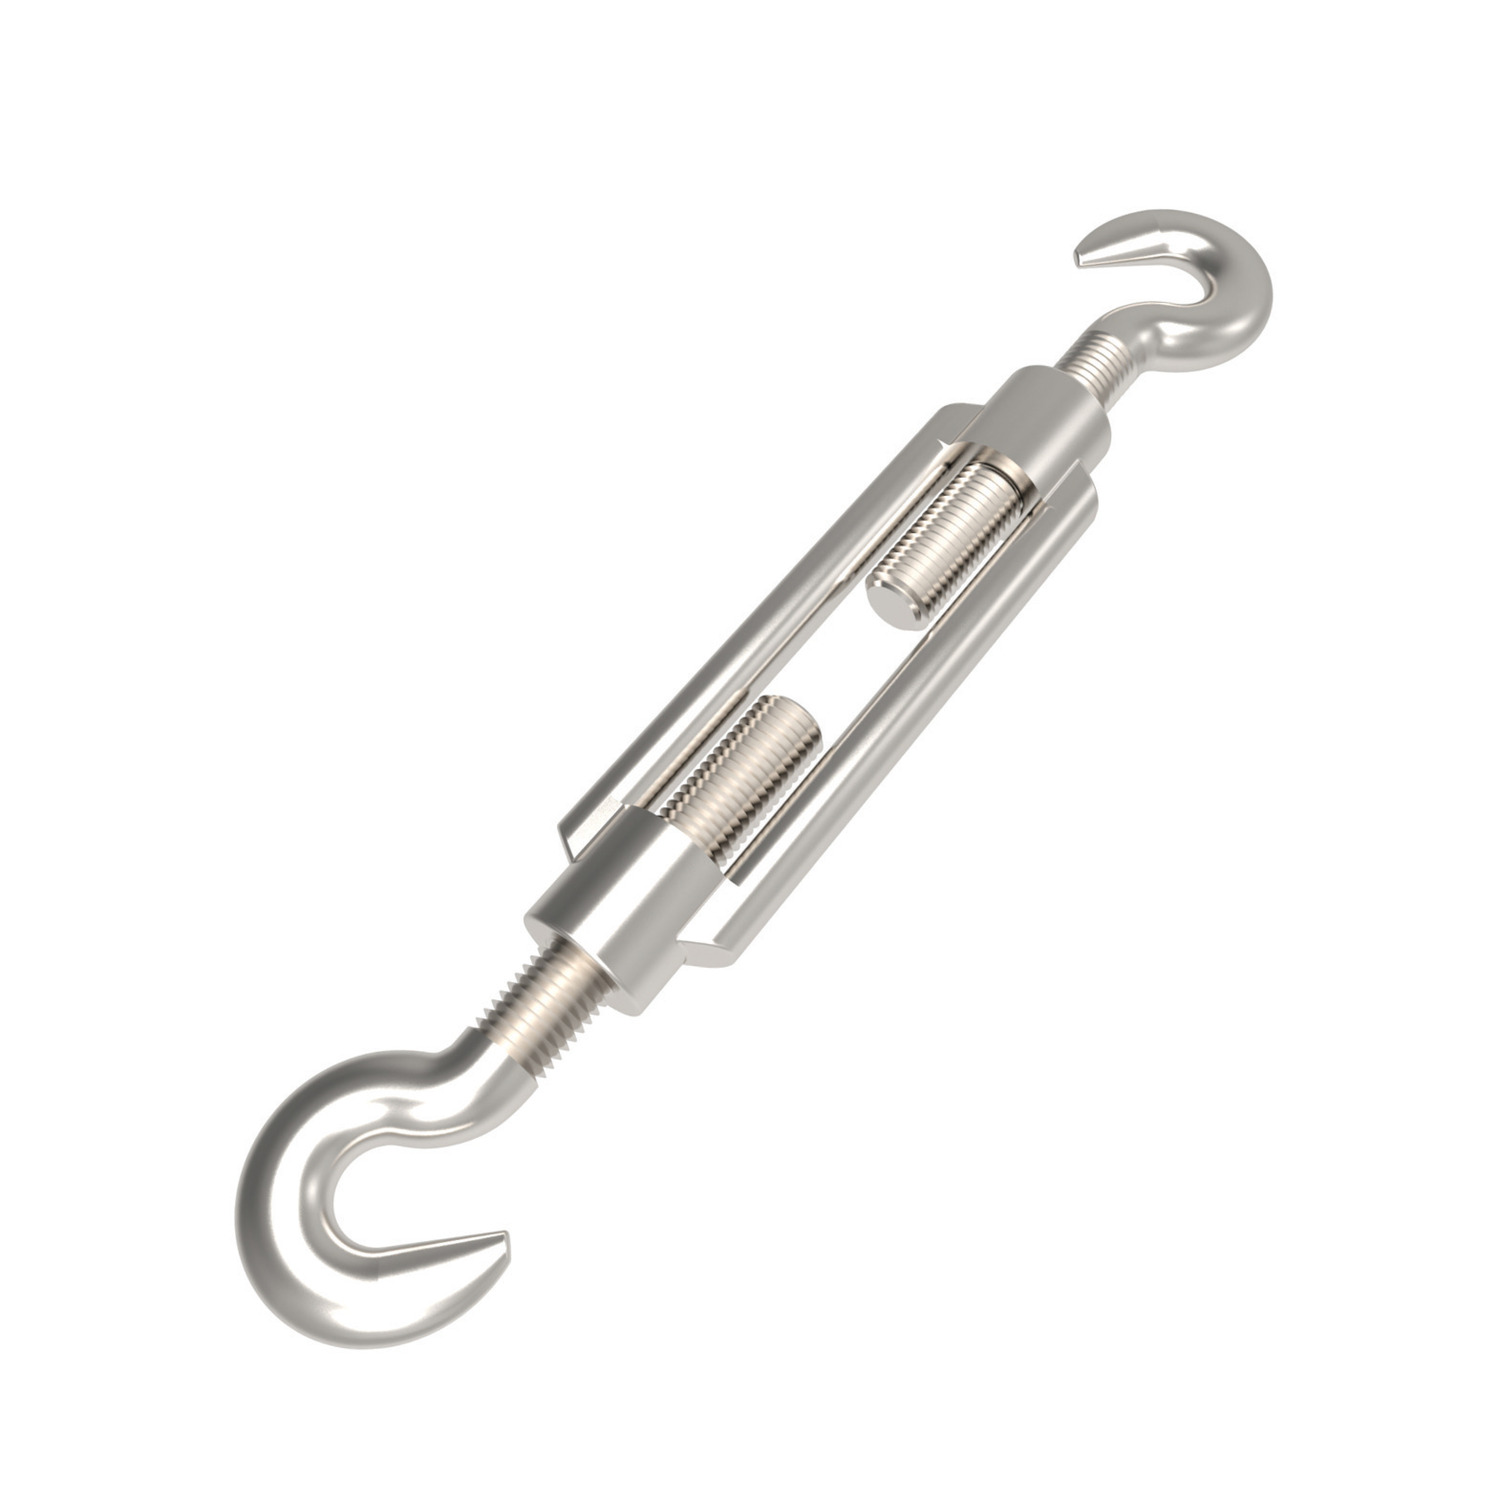 Hook End Turnbuckles A4 Stainless steel open turnbuckles with hook ends. Manufactured to DIN 1480 hook to hook. Sizes from M6 to M16. Lengths from 110mm to 170mm.